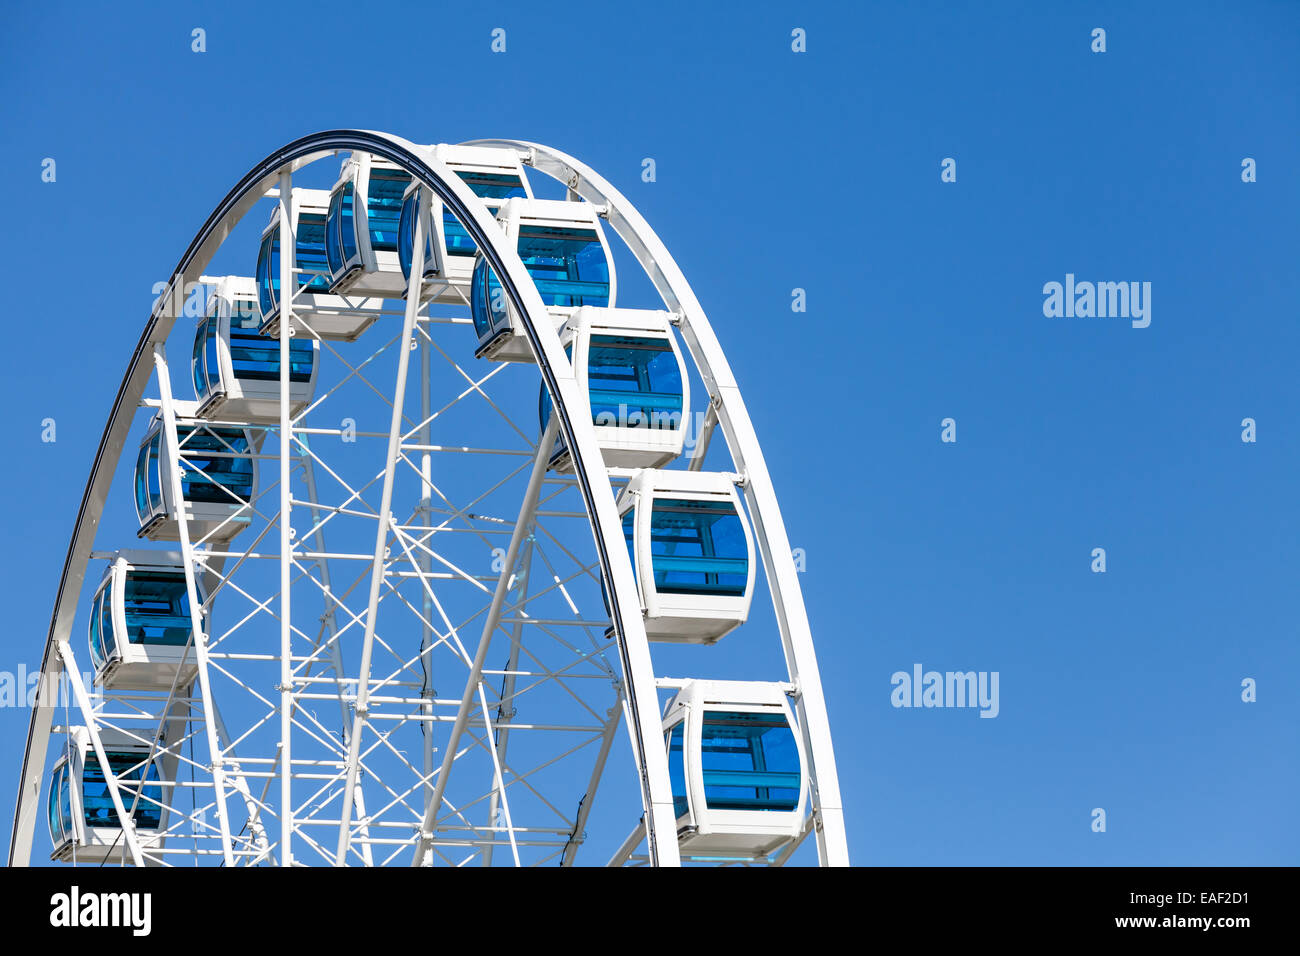 Ferris wheel over clear blue sky background Stock Photo